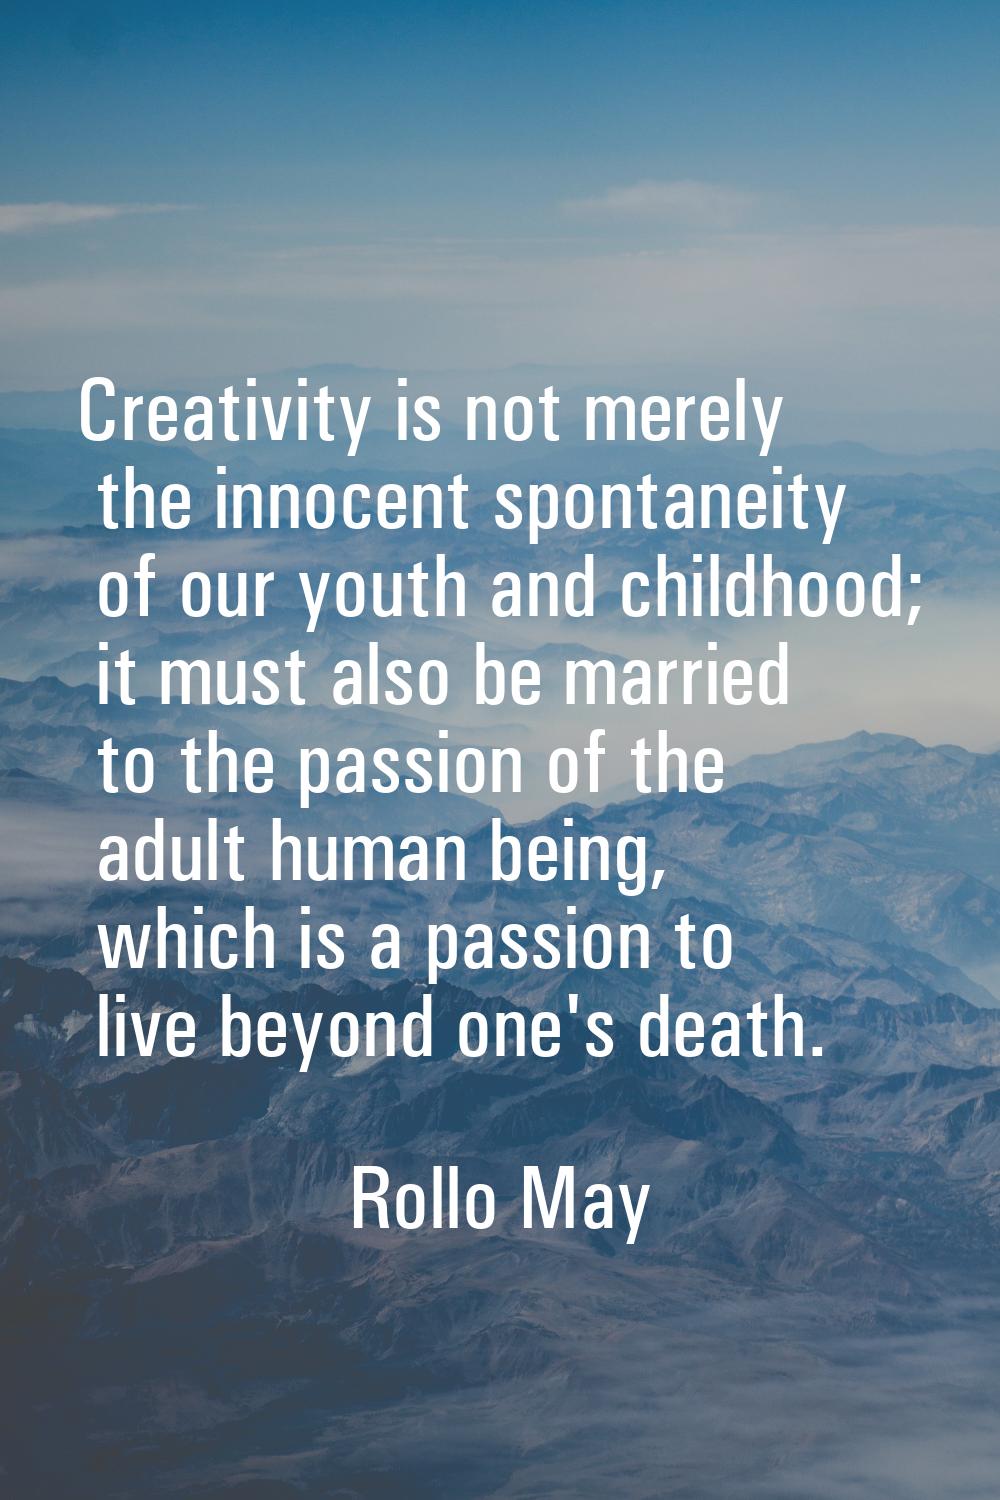 Creativity is not merely the innocent spontaneity of our youth and childhood; it must also be marri